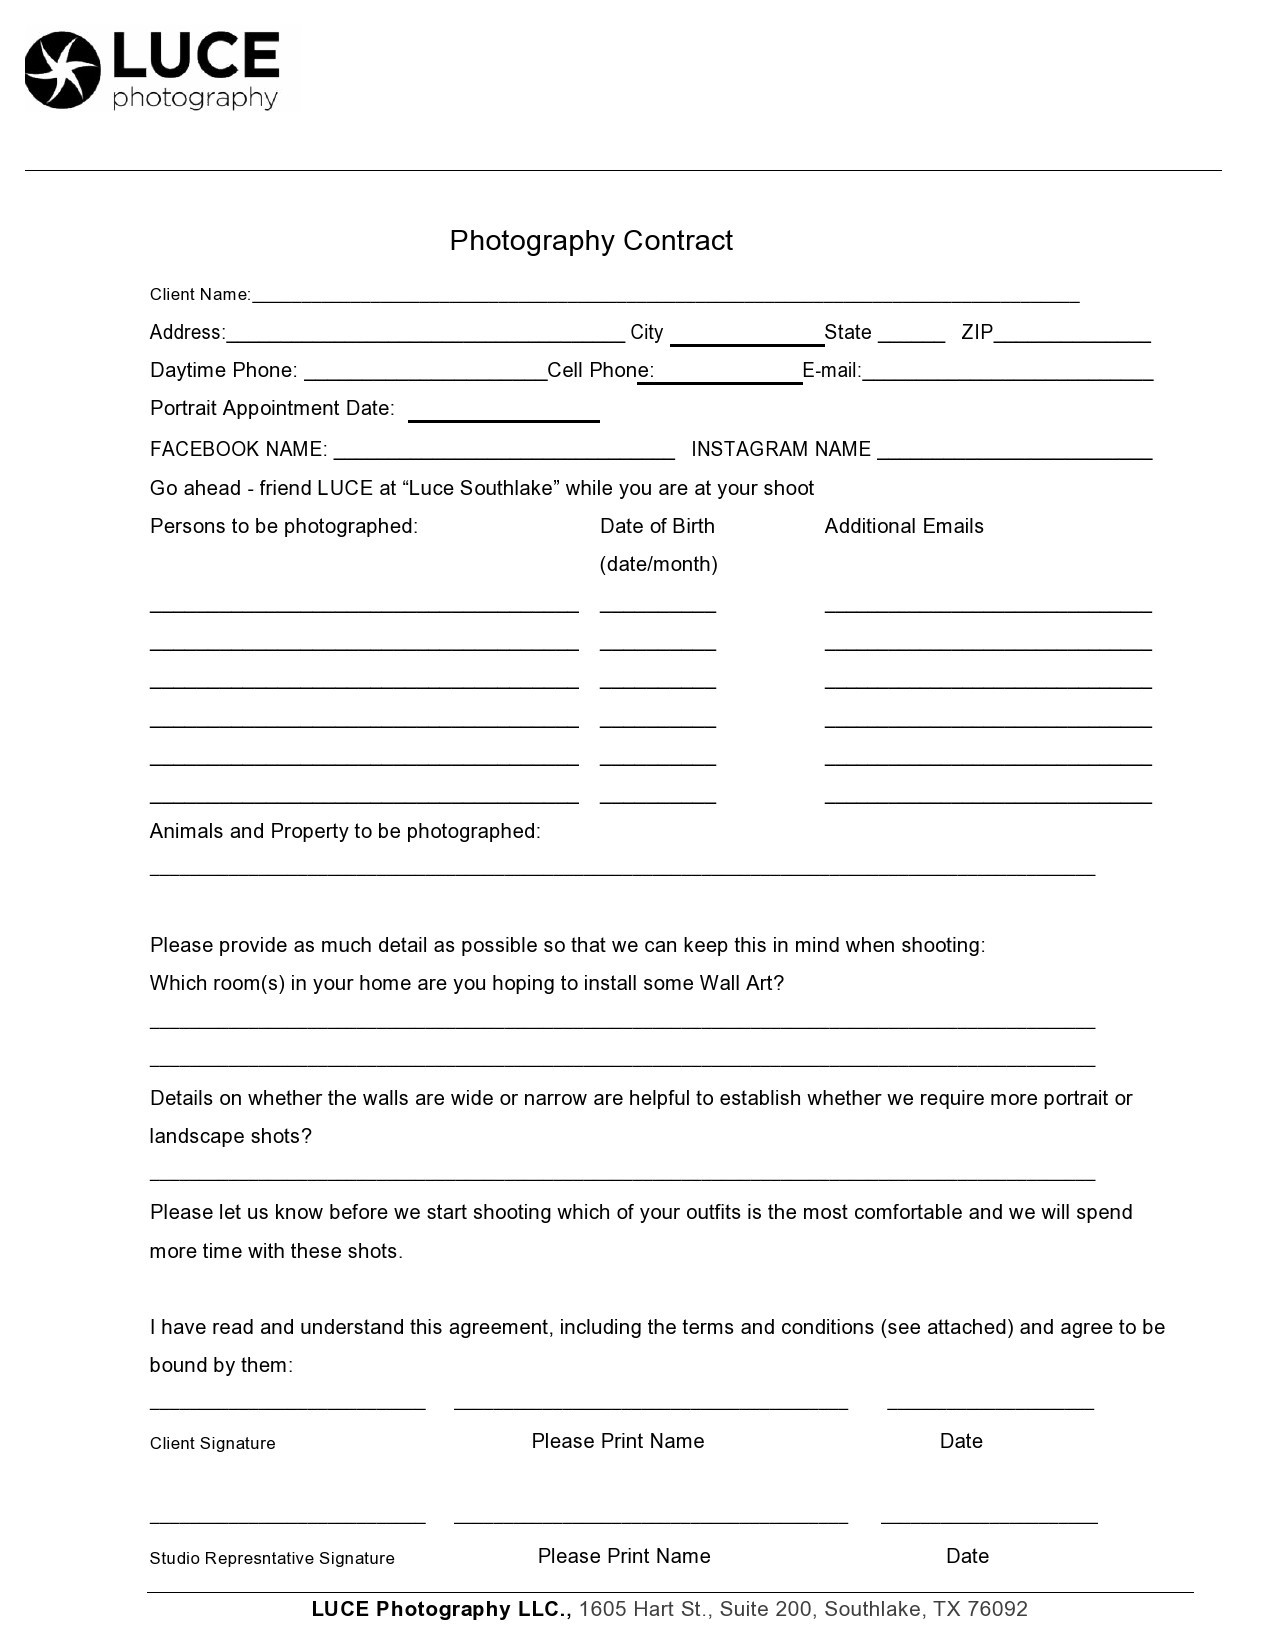 Free photography contract template 17